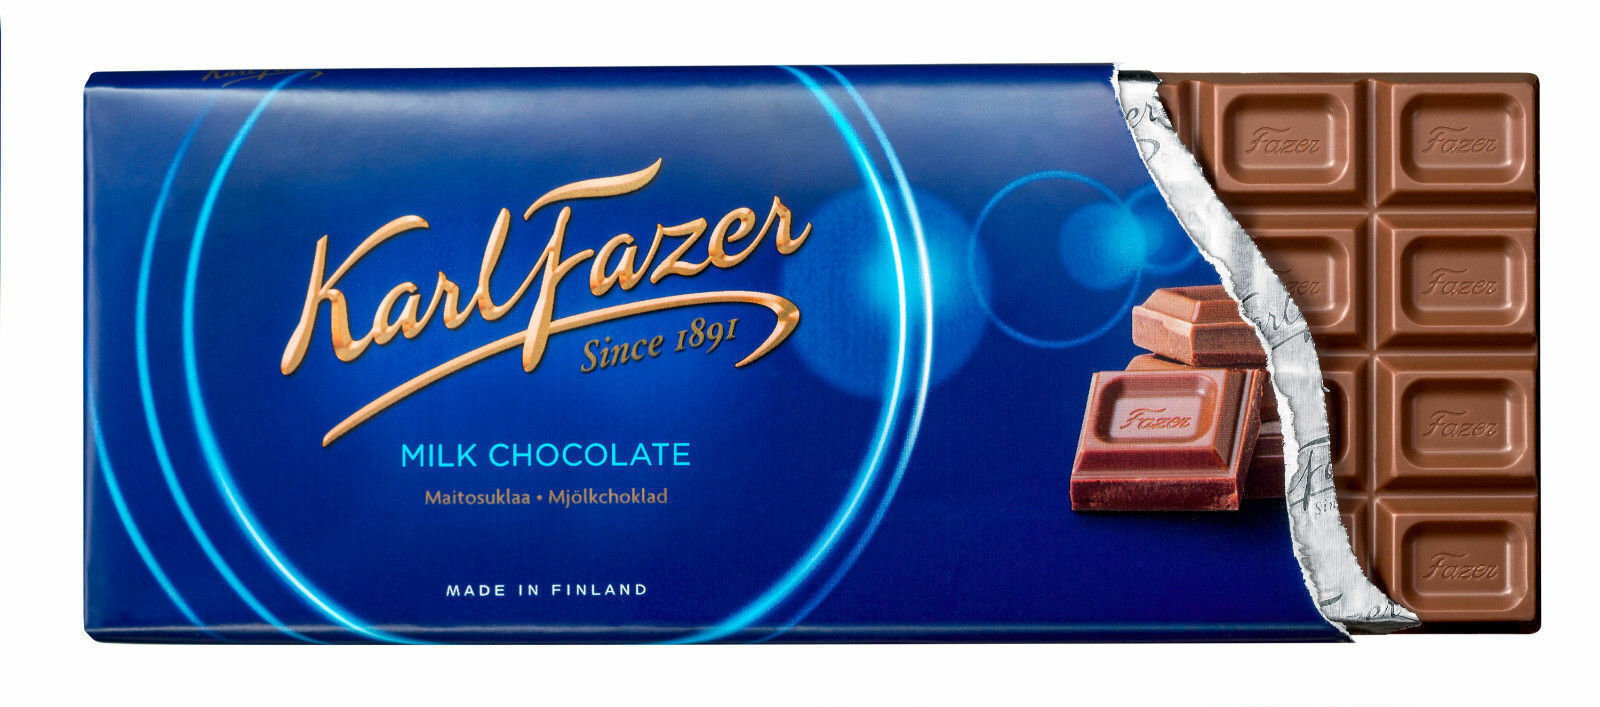 Karl FAZER VARIOUS Chocolate Bars 200g (7oz) Since 1891 Made in CHOOSE 8 *EIGHT* - $58.89